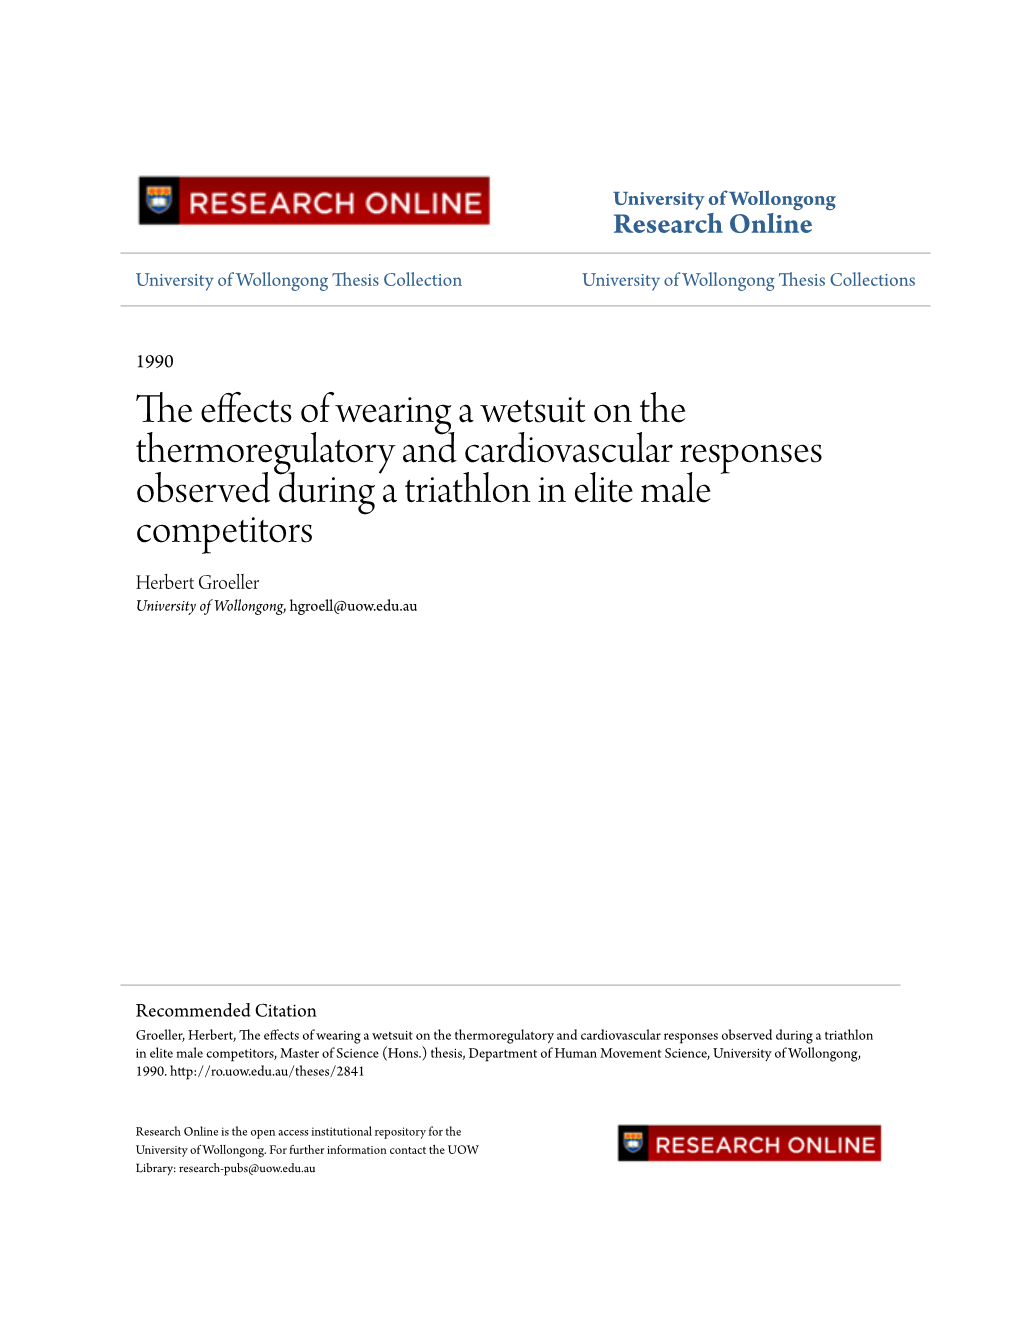 The Effects of Wearing a Wetsuit on the Thermoregulatory And